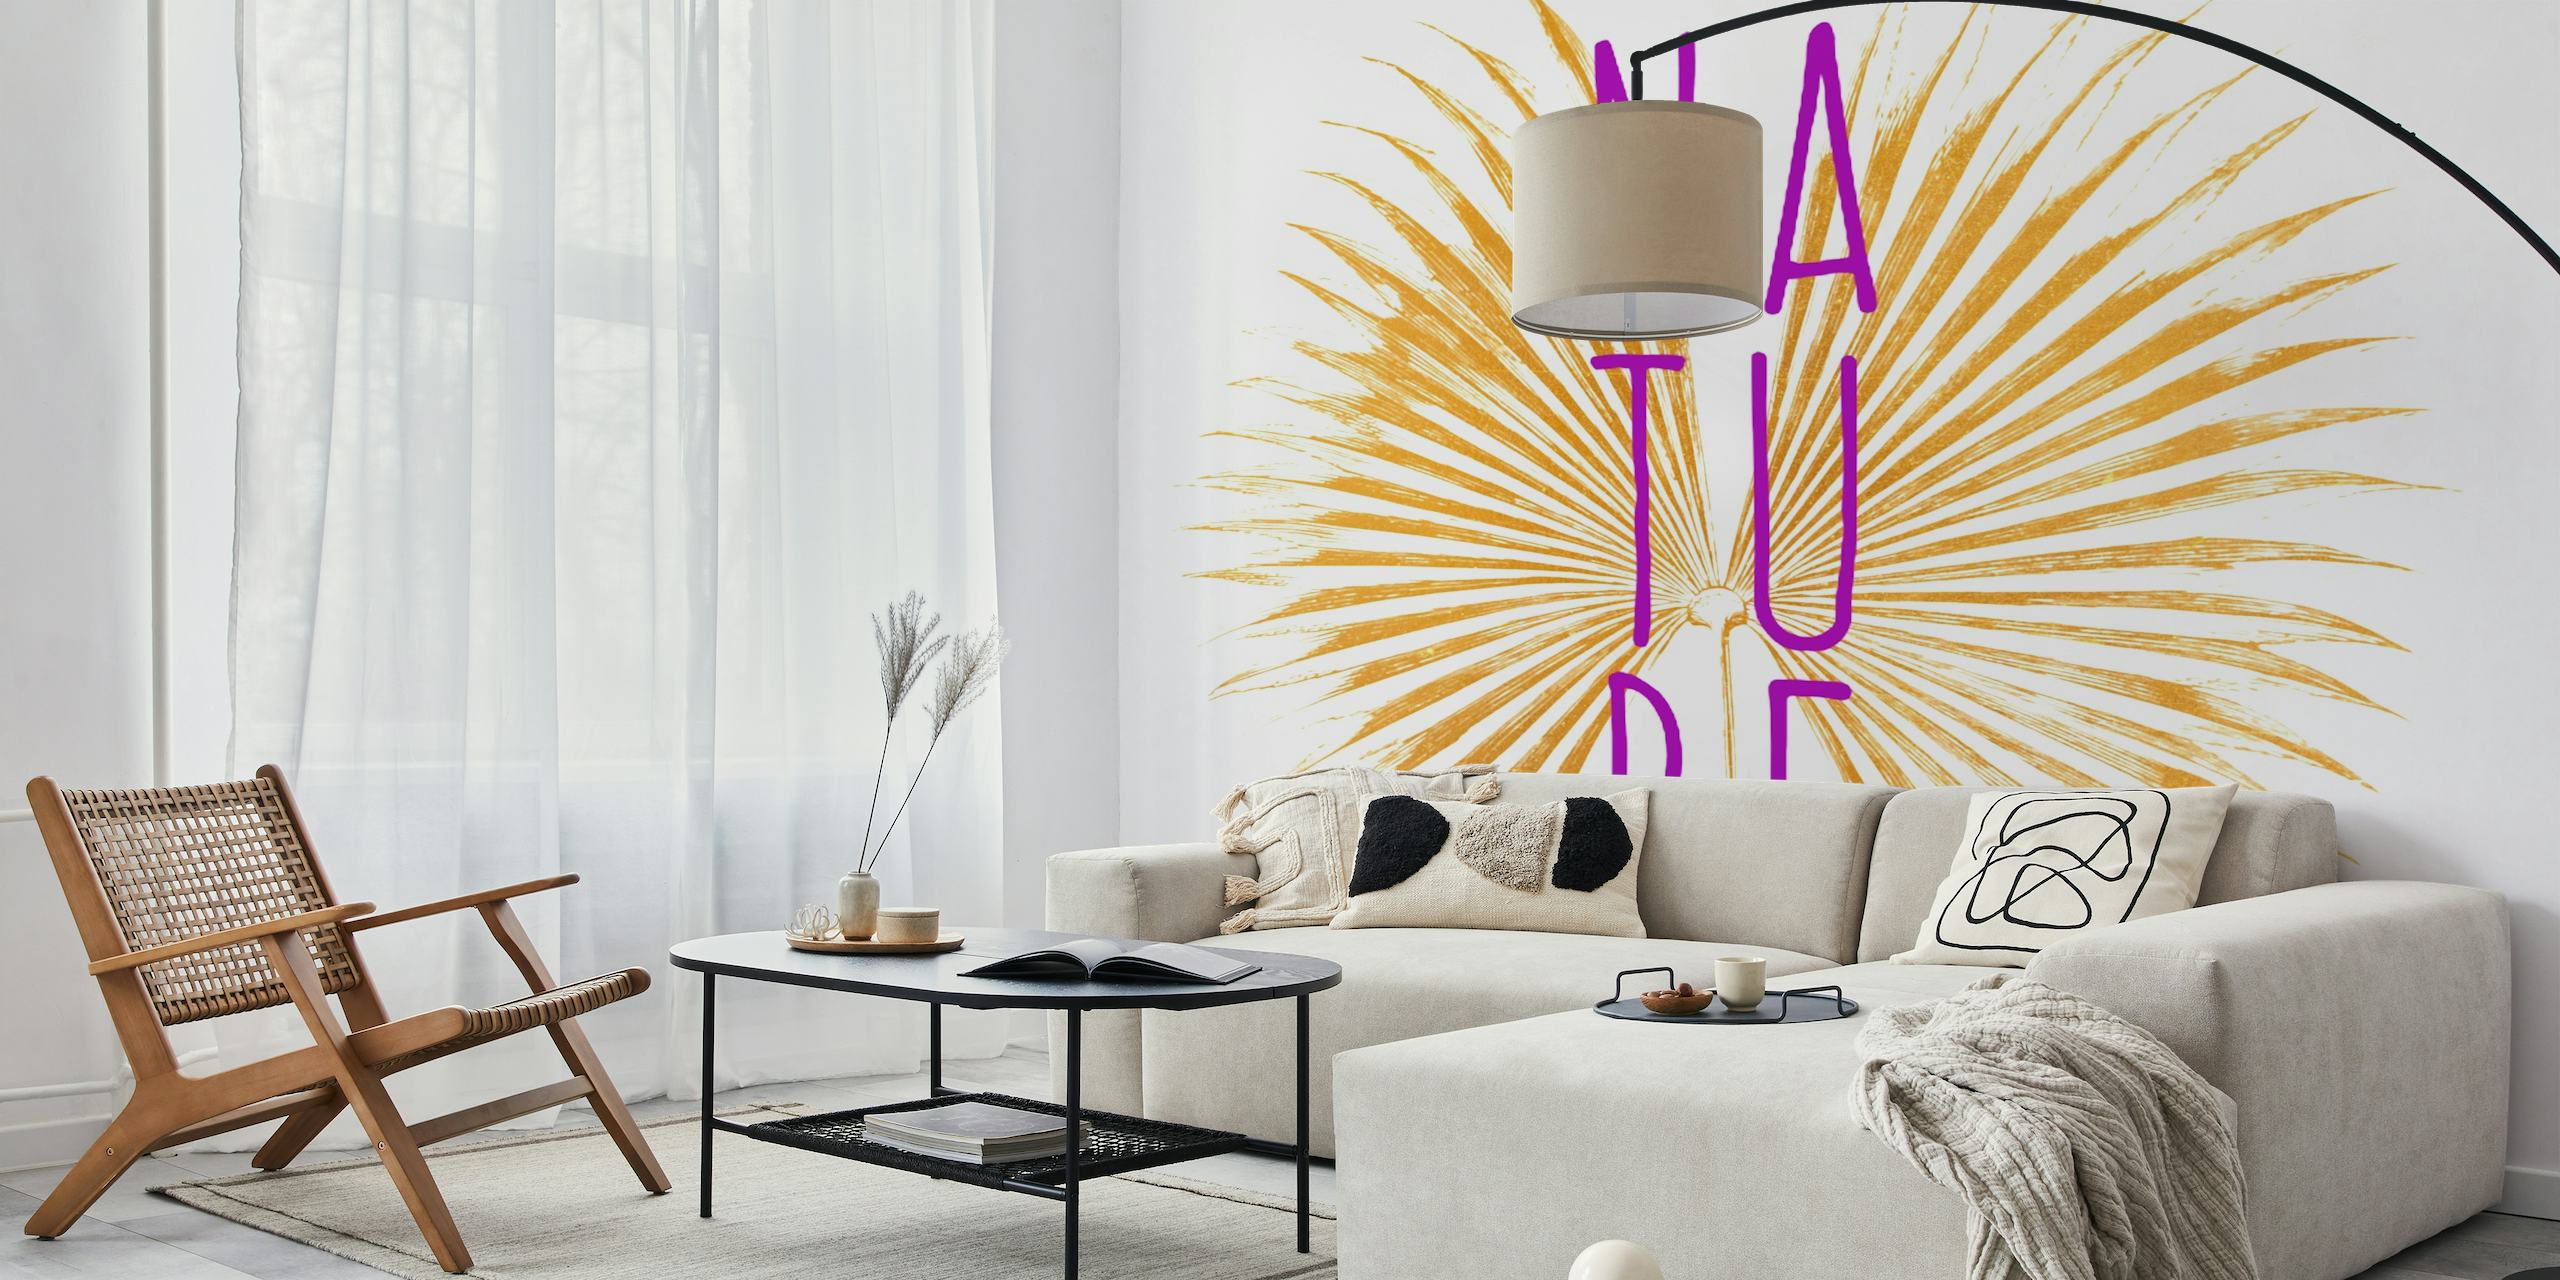 Wall mural with sunburst pattern and the word 'NATURE' in purple